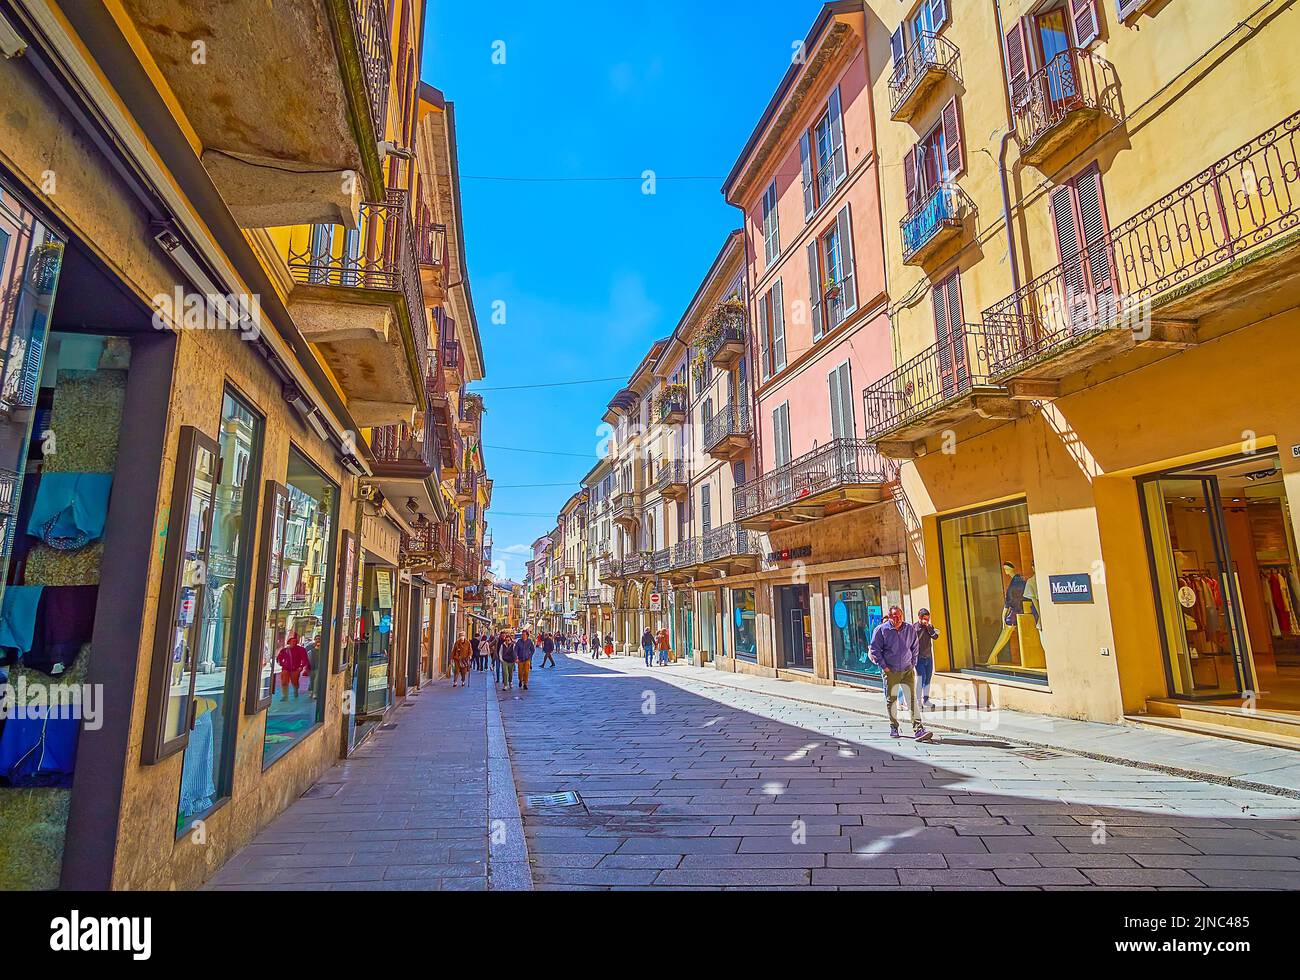 PAVIA, ITALY - APRIL 9, 2022: Walk along Corso Strada Nouva street sandwiched between historical buildings with stores and cafes, on April 9 in Pavia, Stock Photo